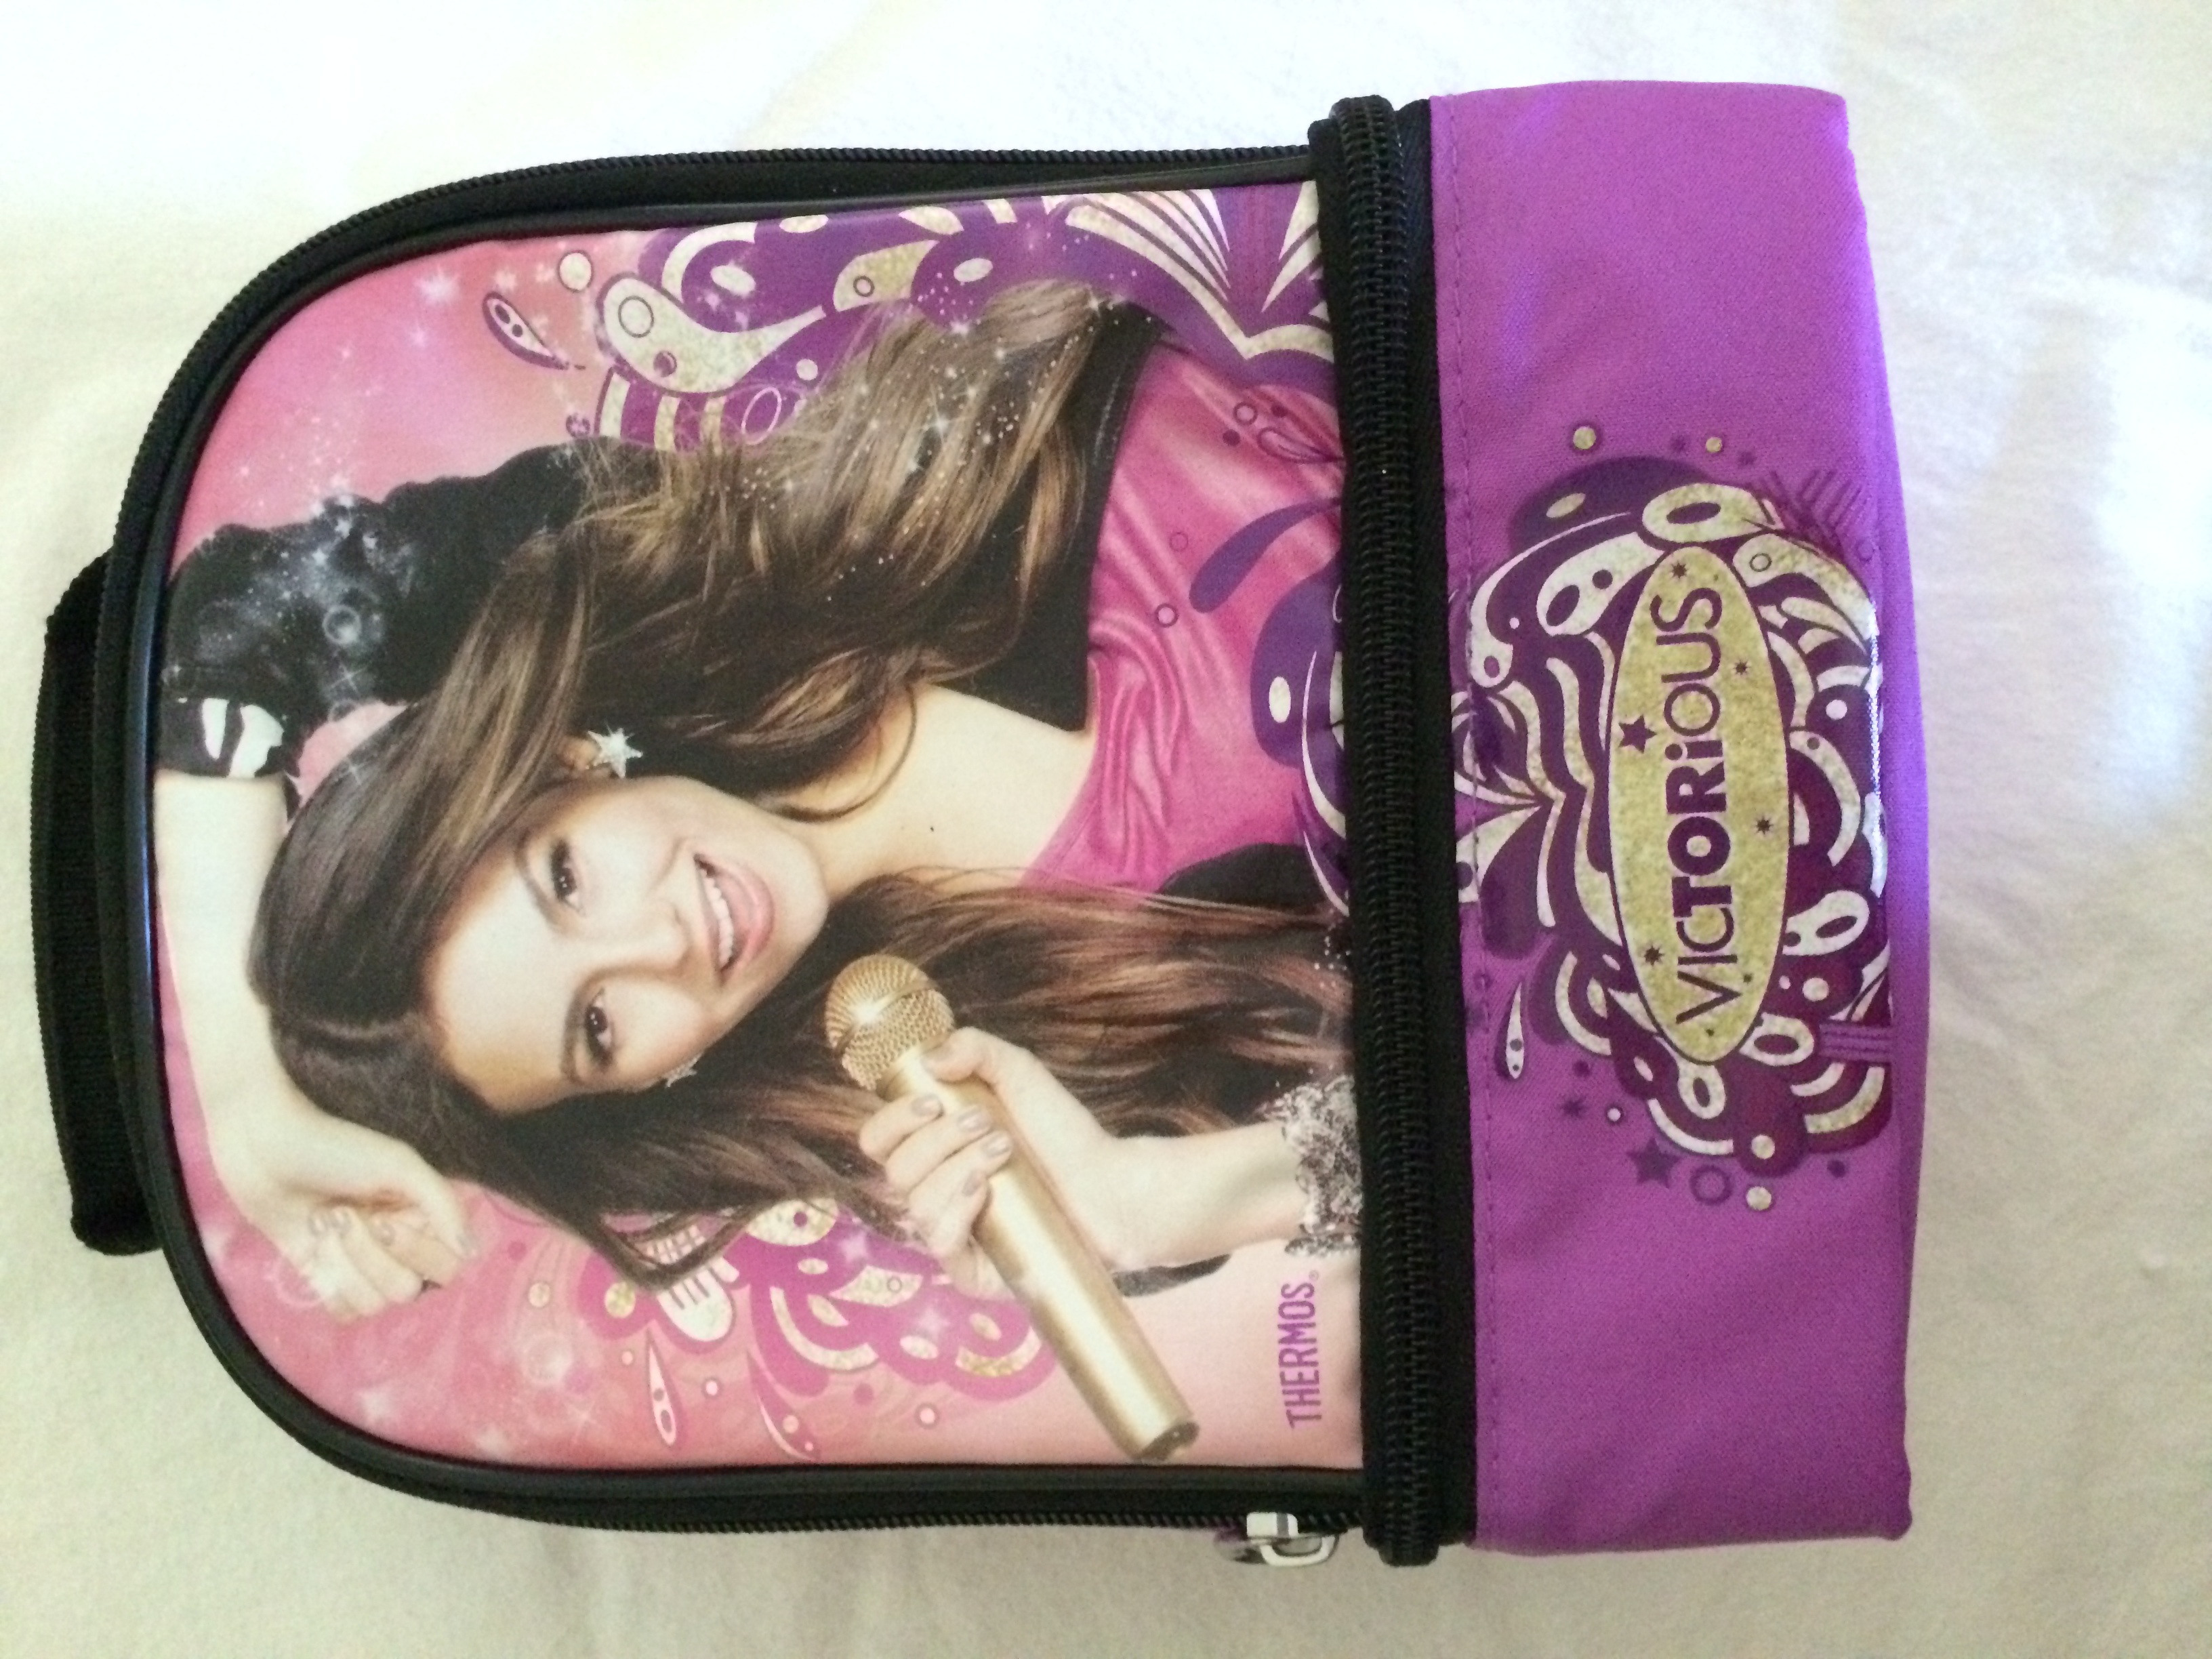 Victorious (Victoria Justice) Thermos lunch bag